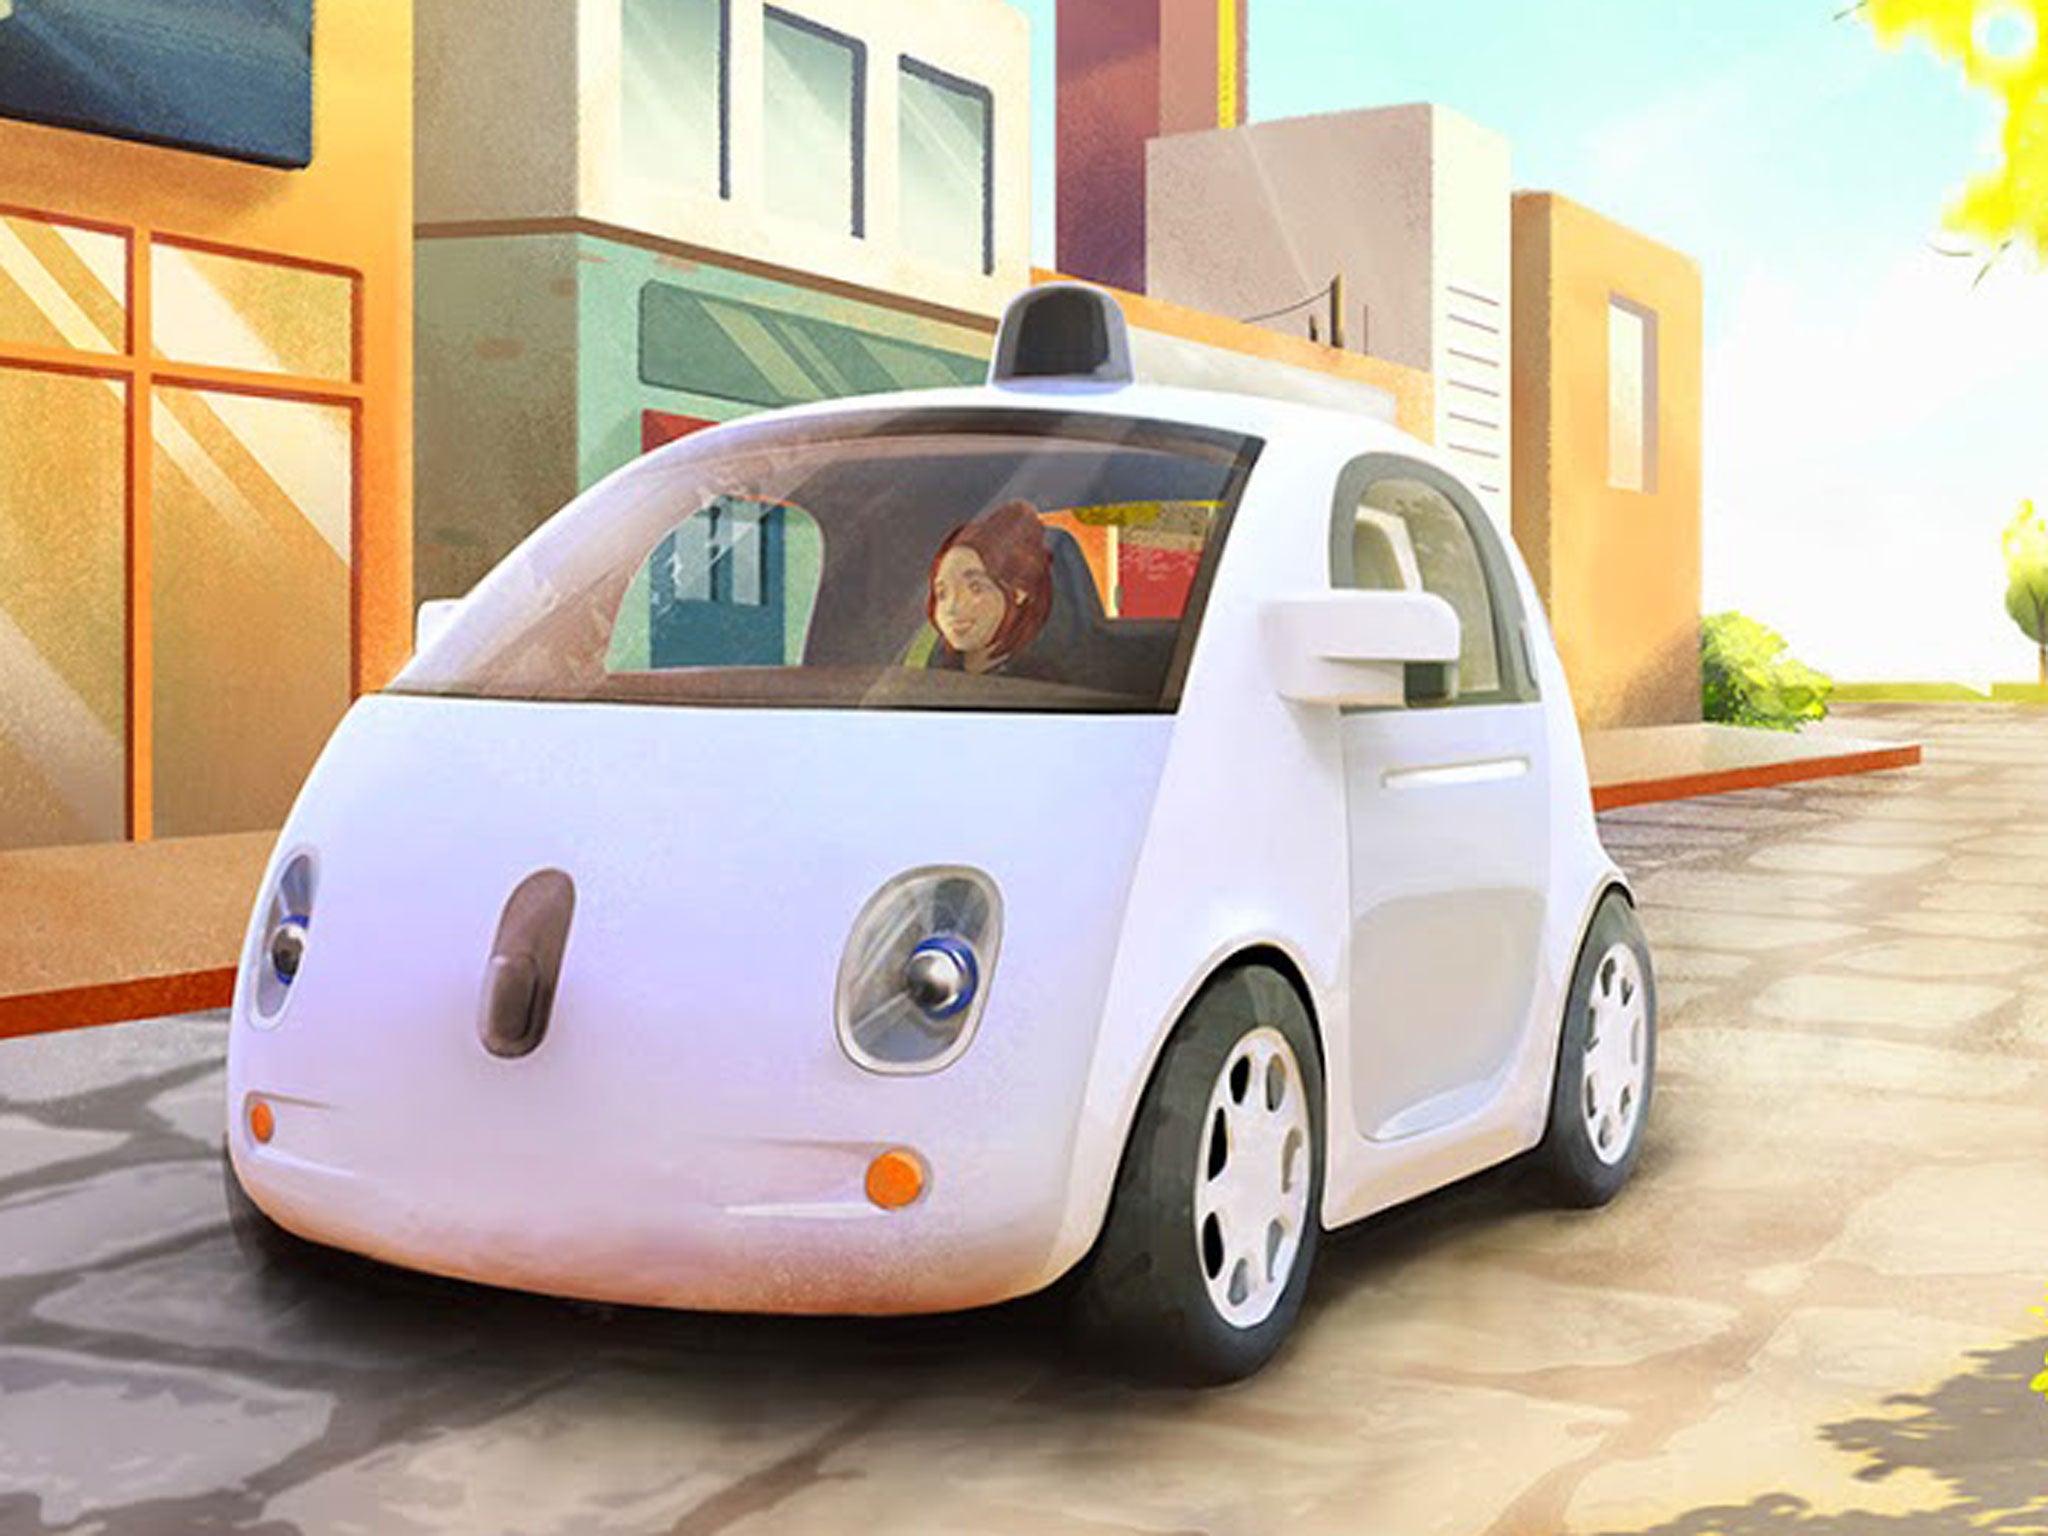 An artist's impression of the Google car